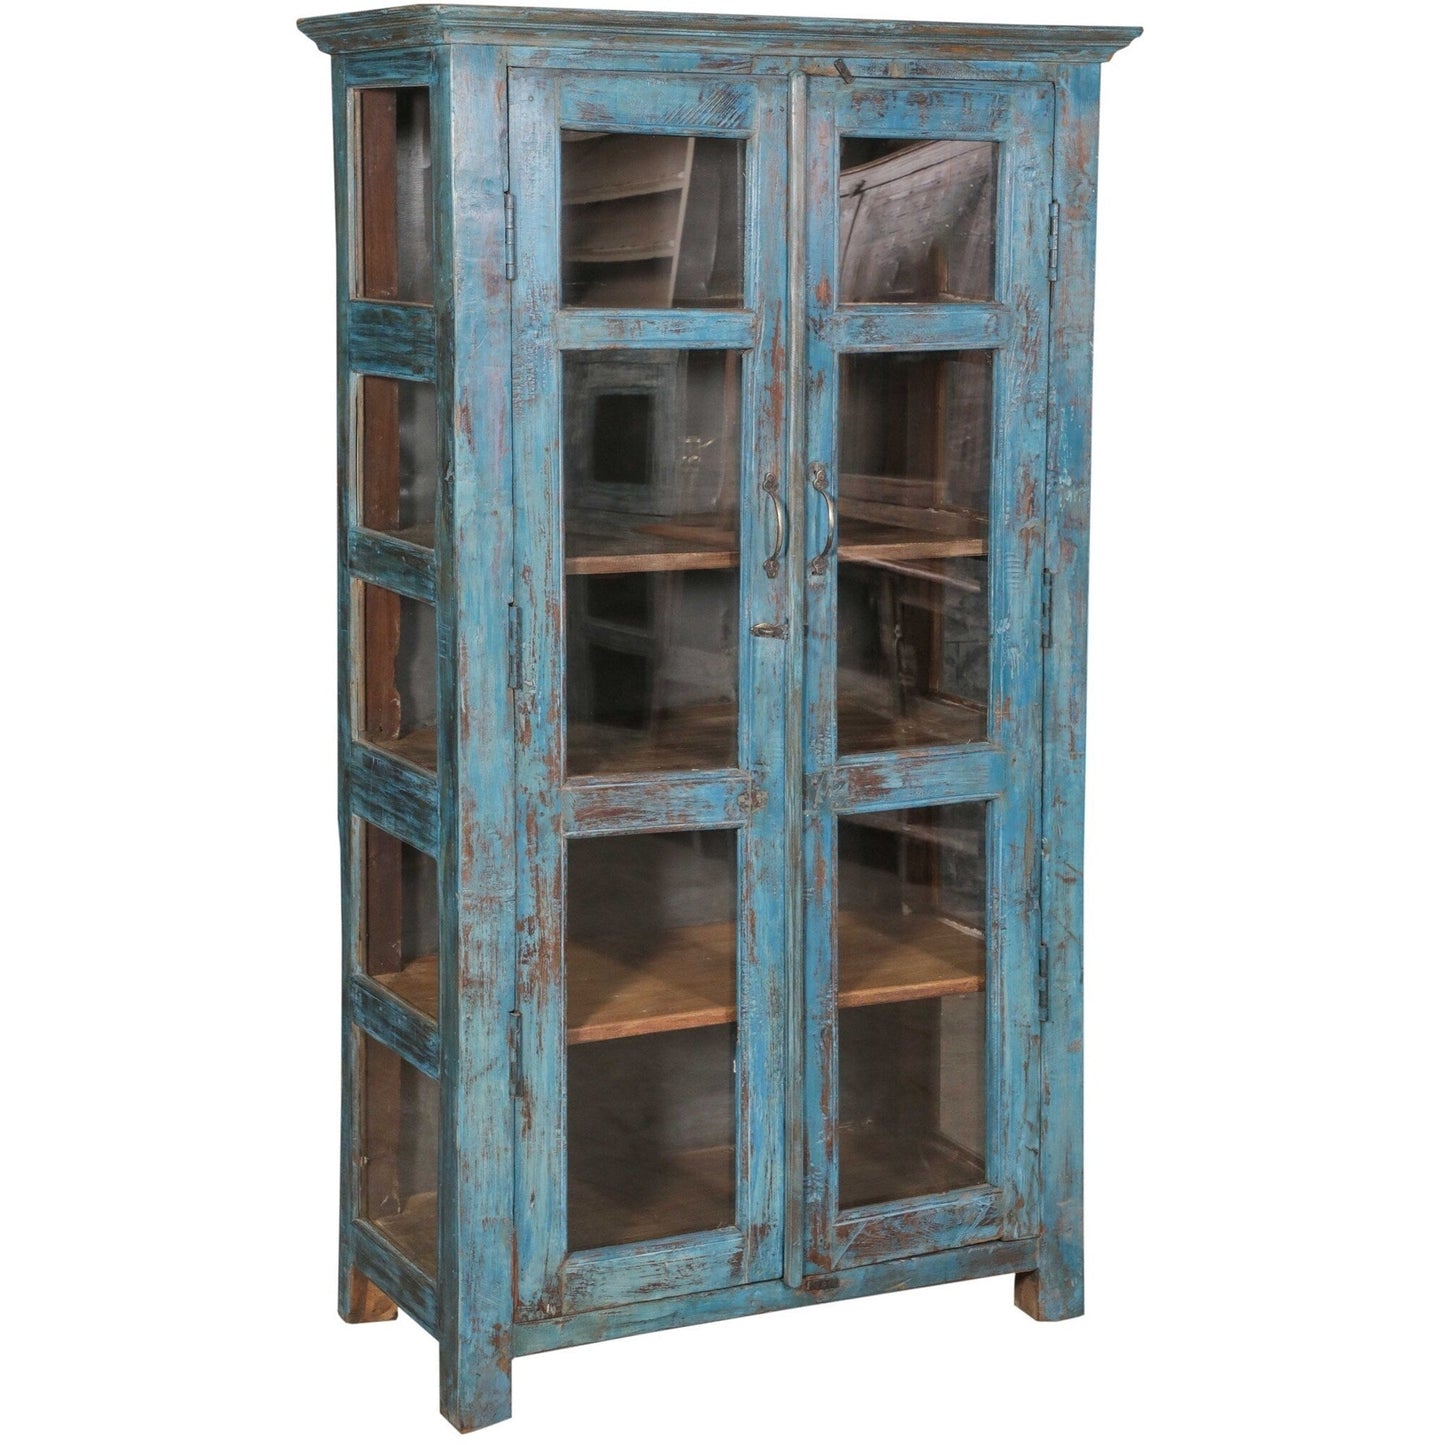 RM-062166, Wooden Cabinet With Glass